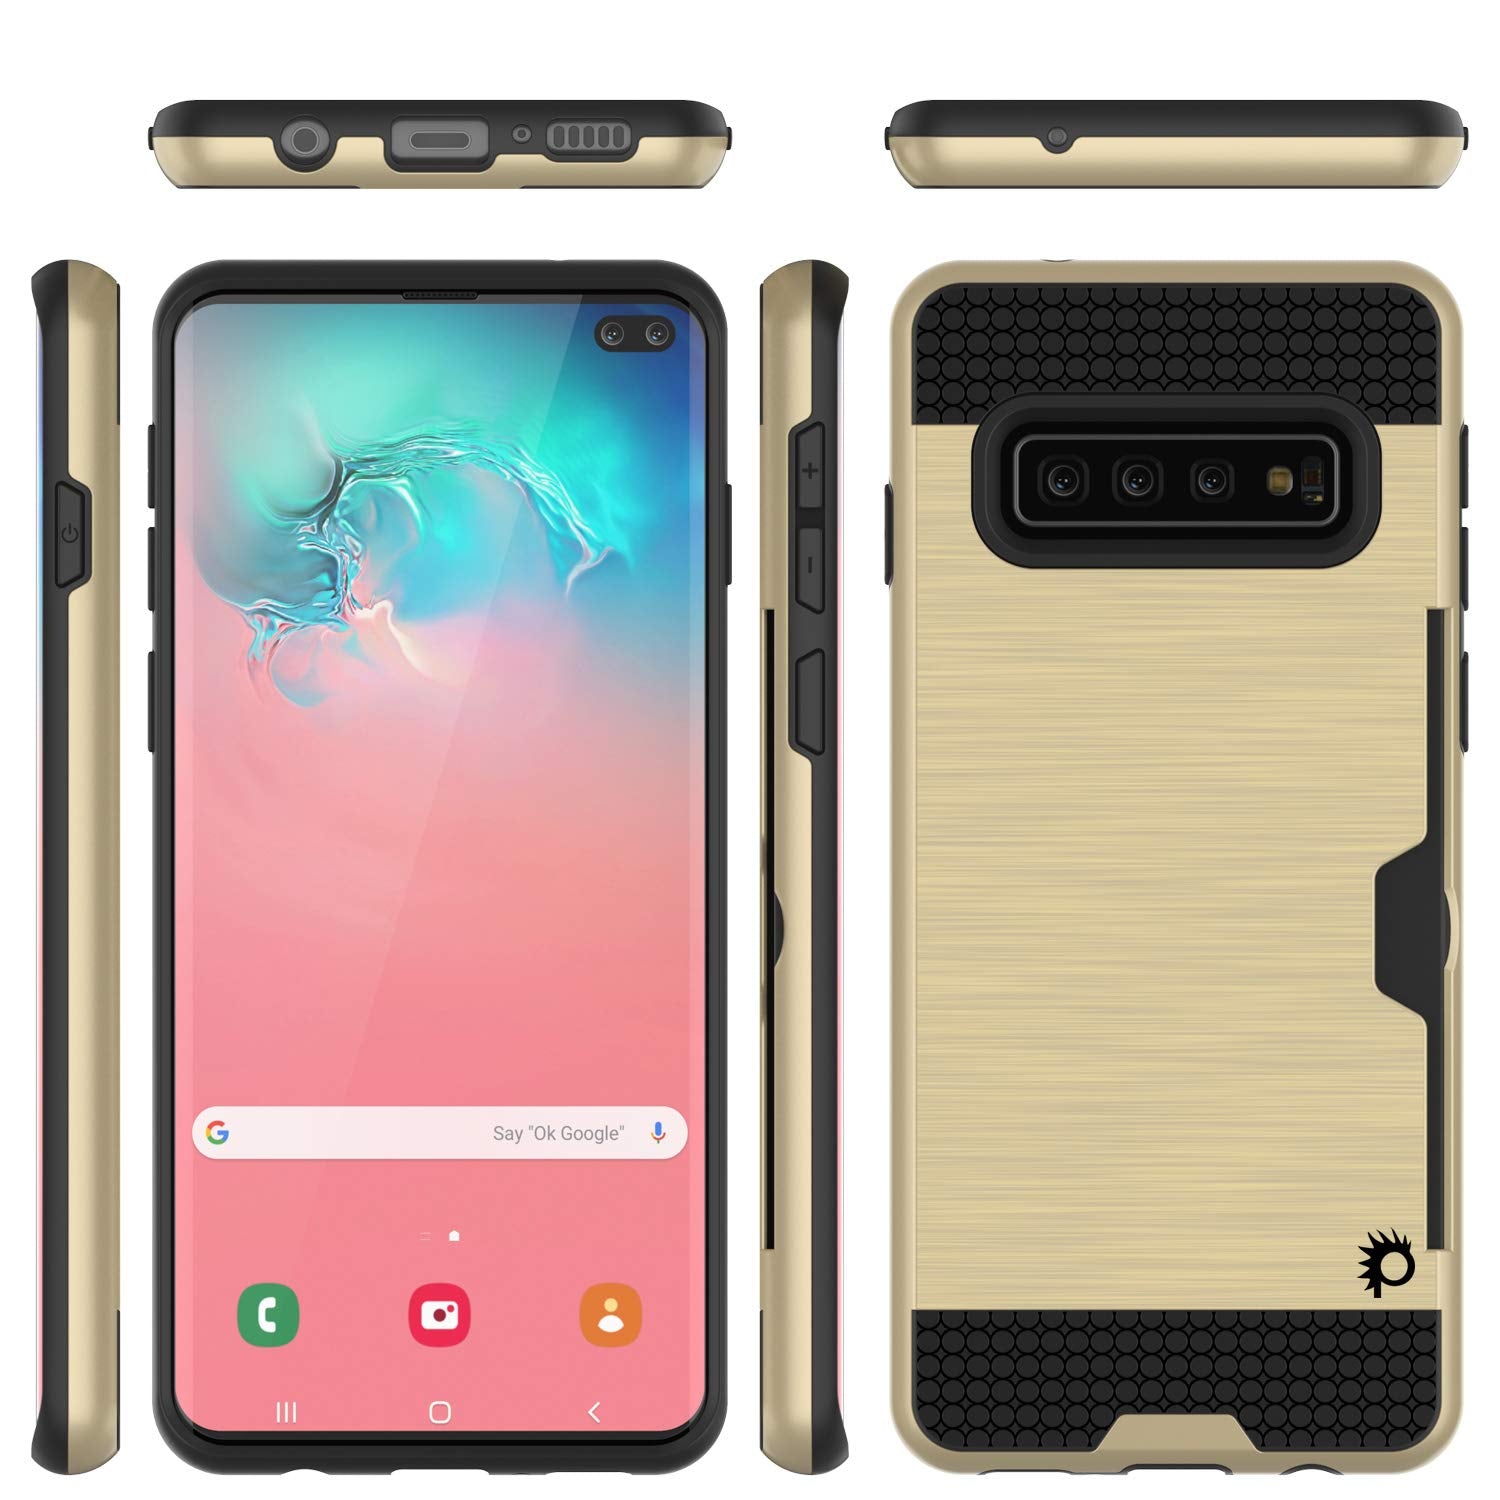 Galaxy S10+ Plus  Case, PUNKcase [SLOT Series] [Slim Fit] Dual-Layer Armor Cover w/Integrated Anti-Shock System, Credit Card Slot [Gold]